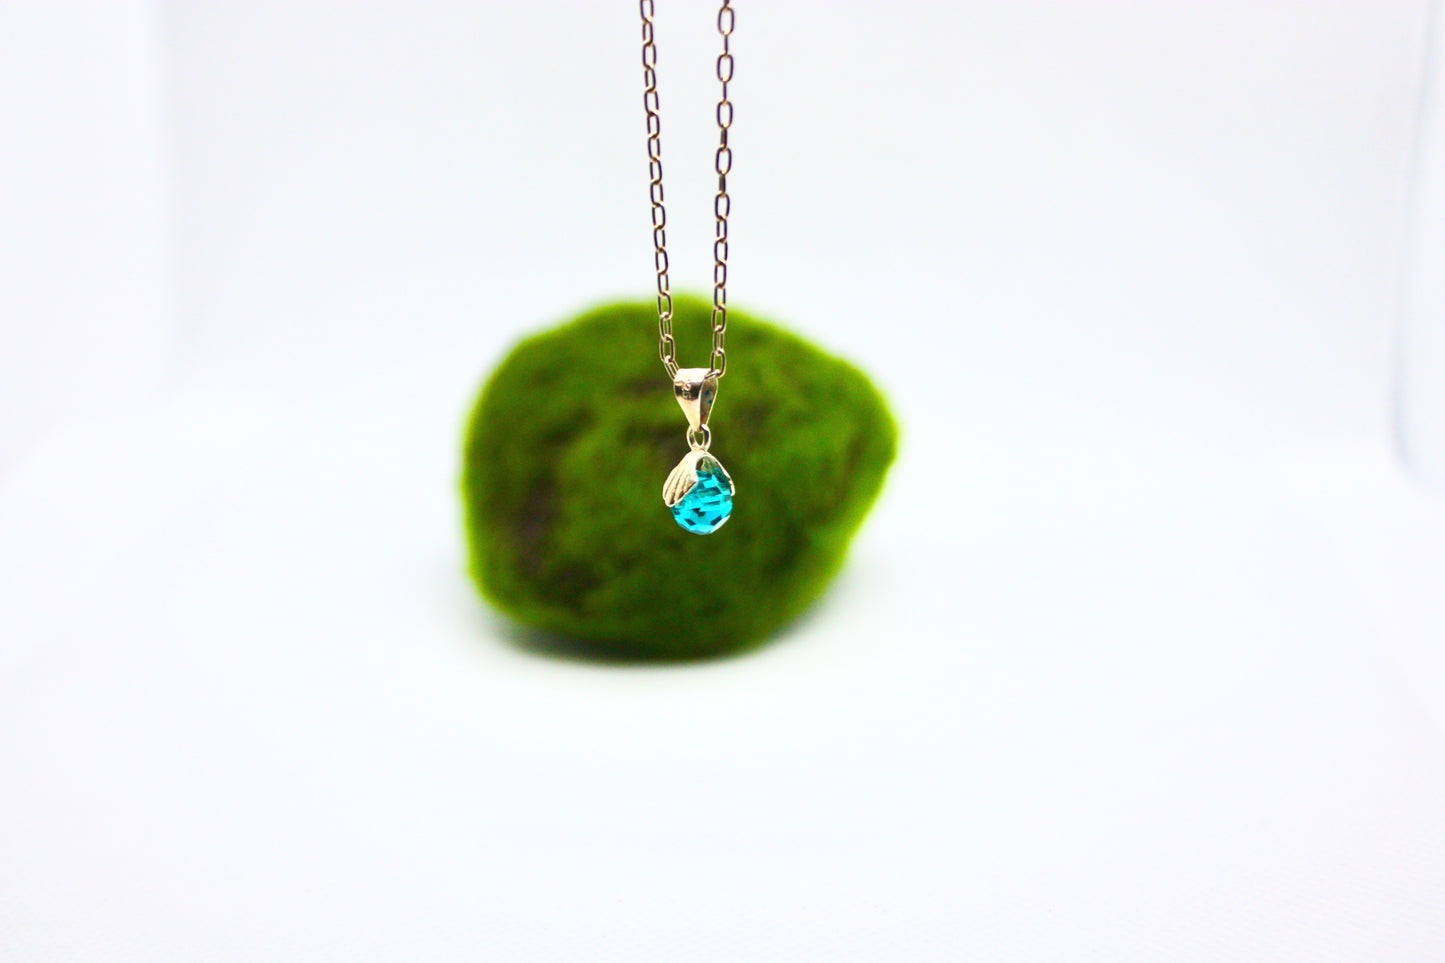 Minimalist Sterling Silver Necklace and Blue Charm